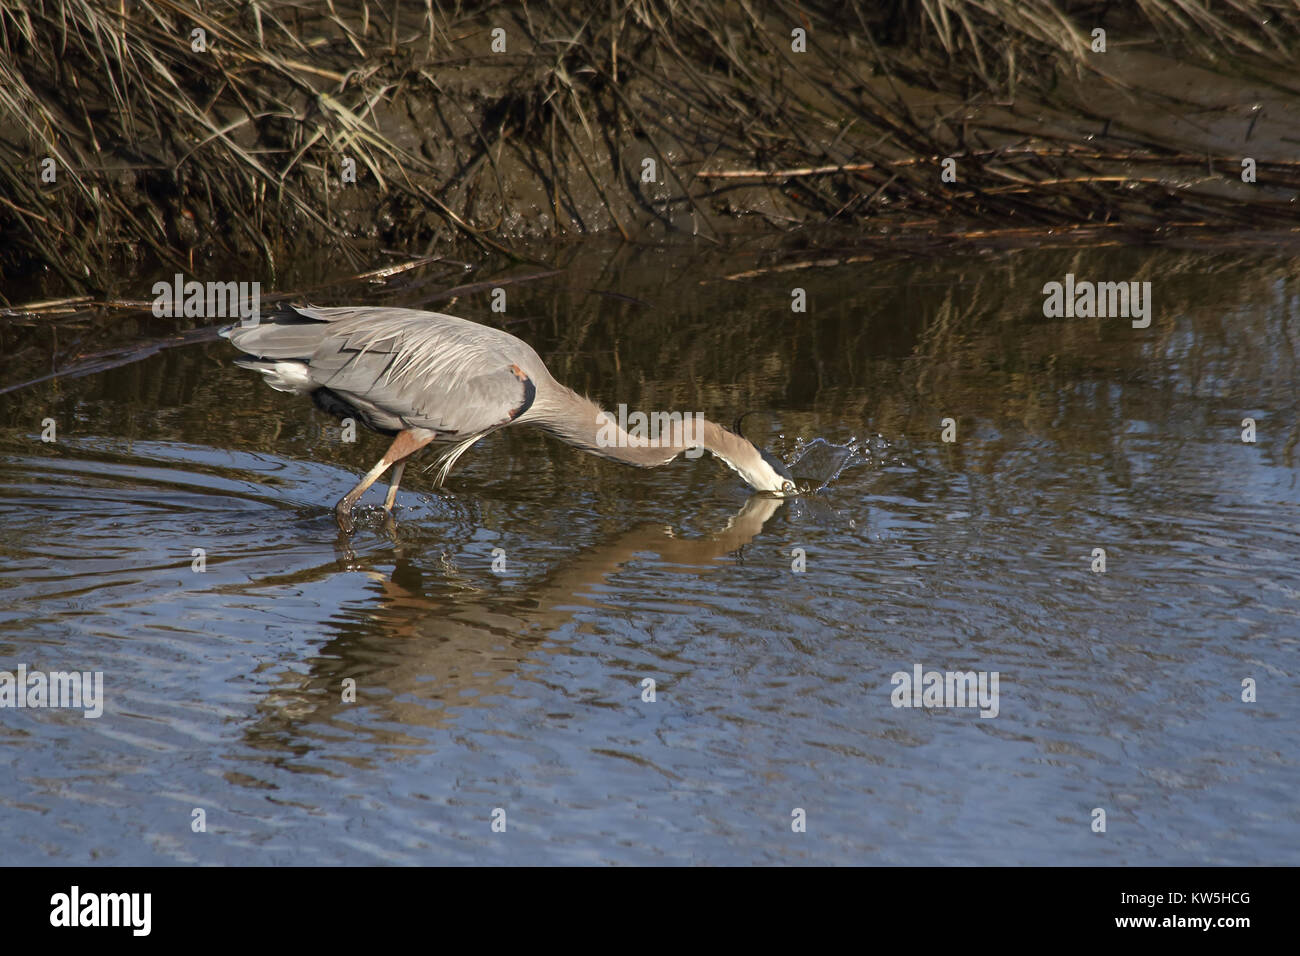 A Great Blue Heron hunting within a saltwater estuary. Stock Photo